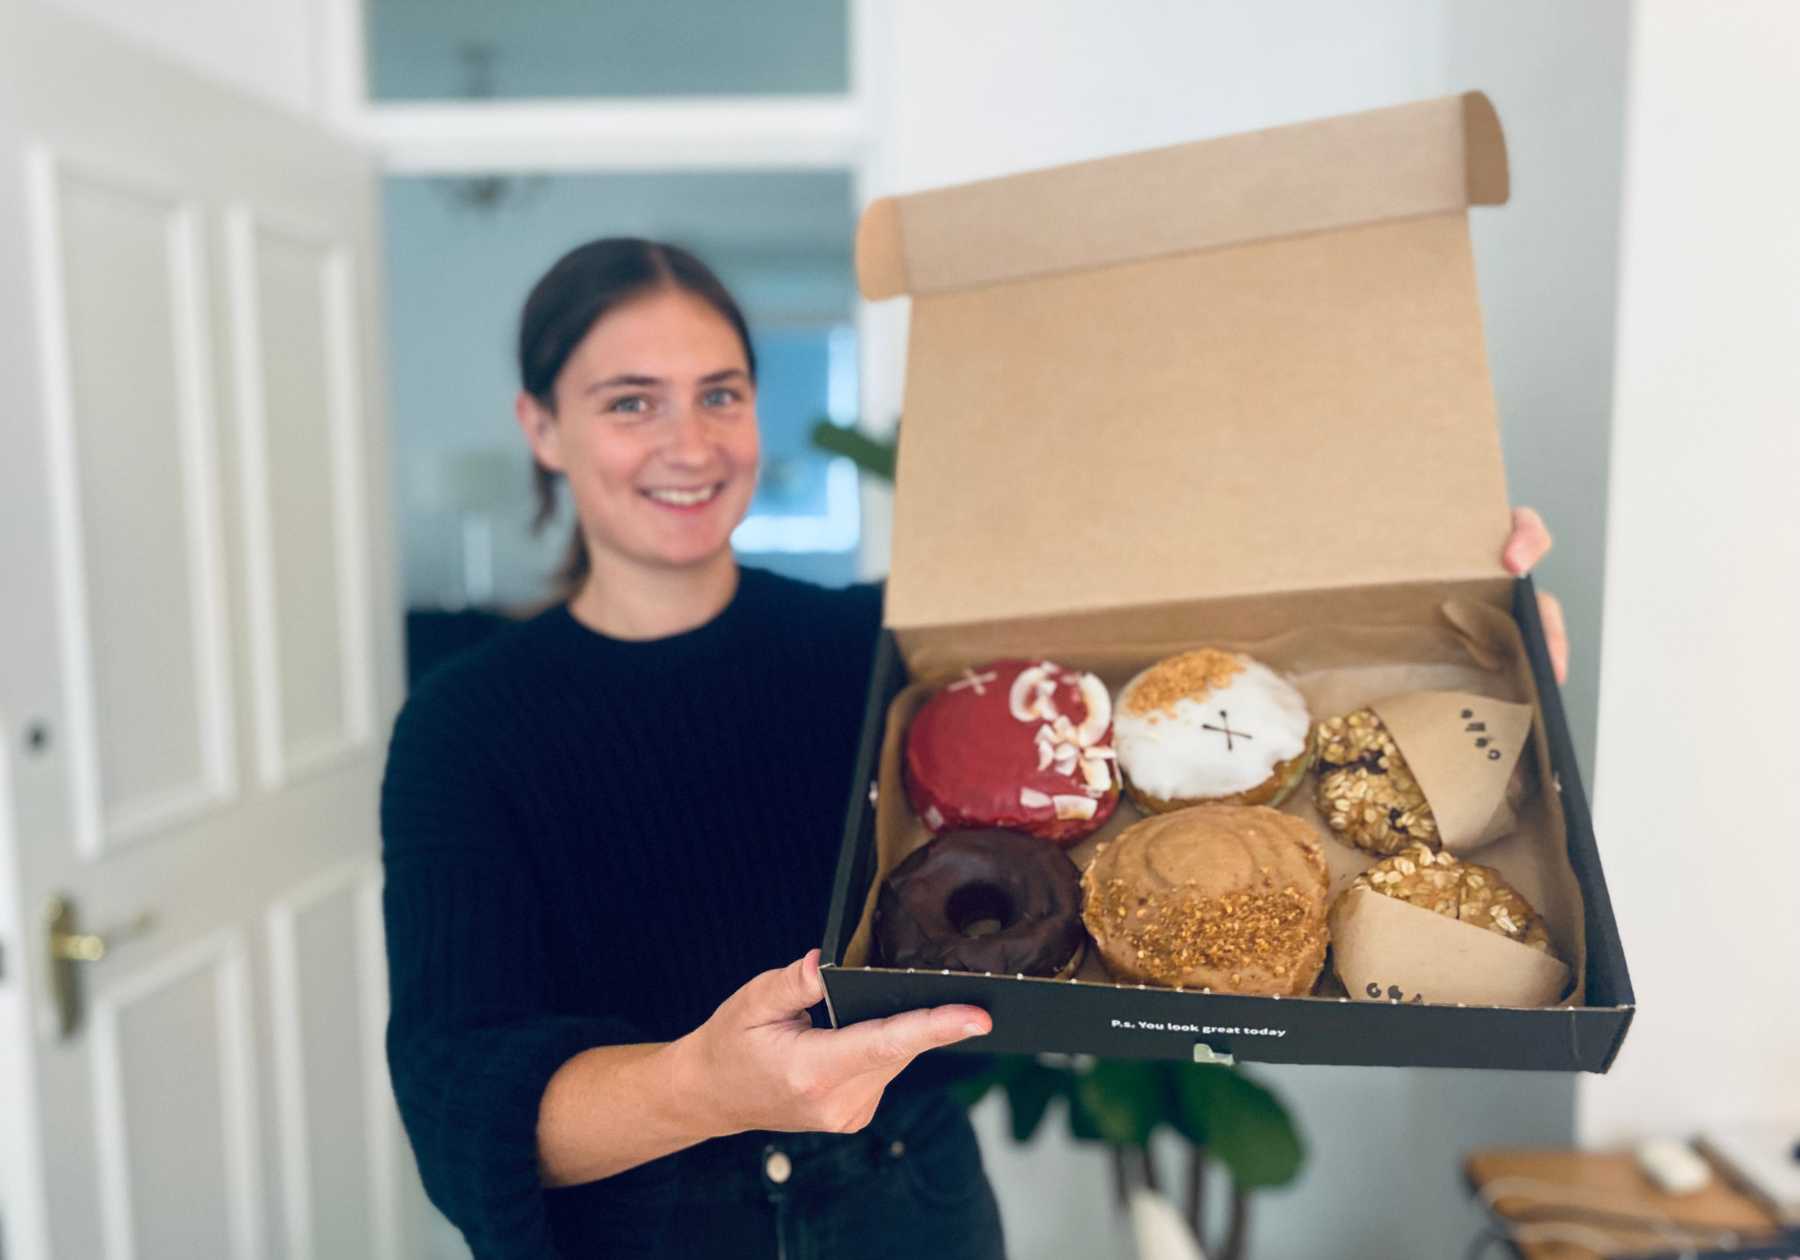 Lucy holding a box of cookies and doughnuts from the best vegan cake delivery service in the UK